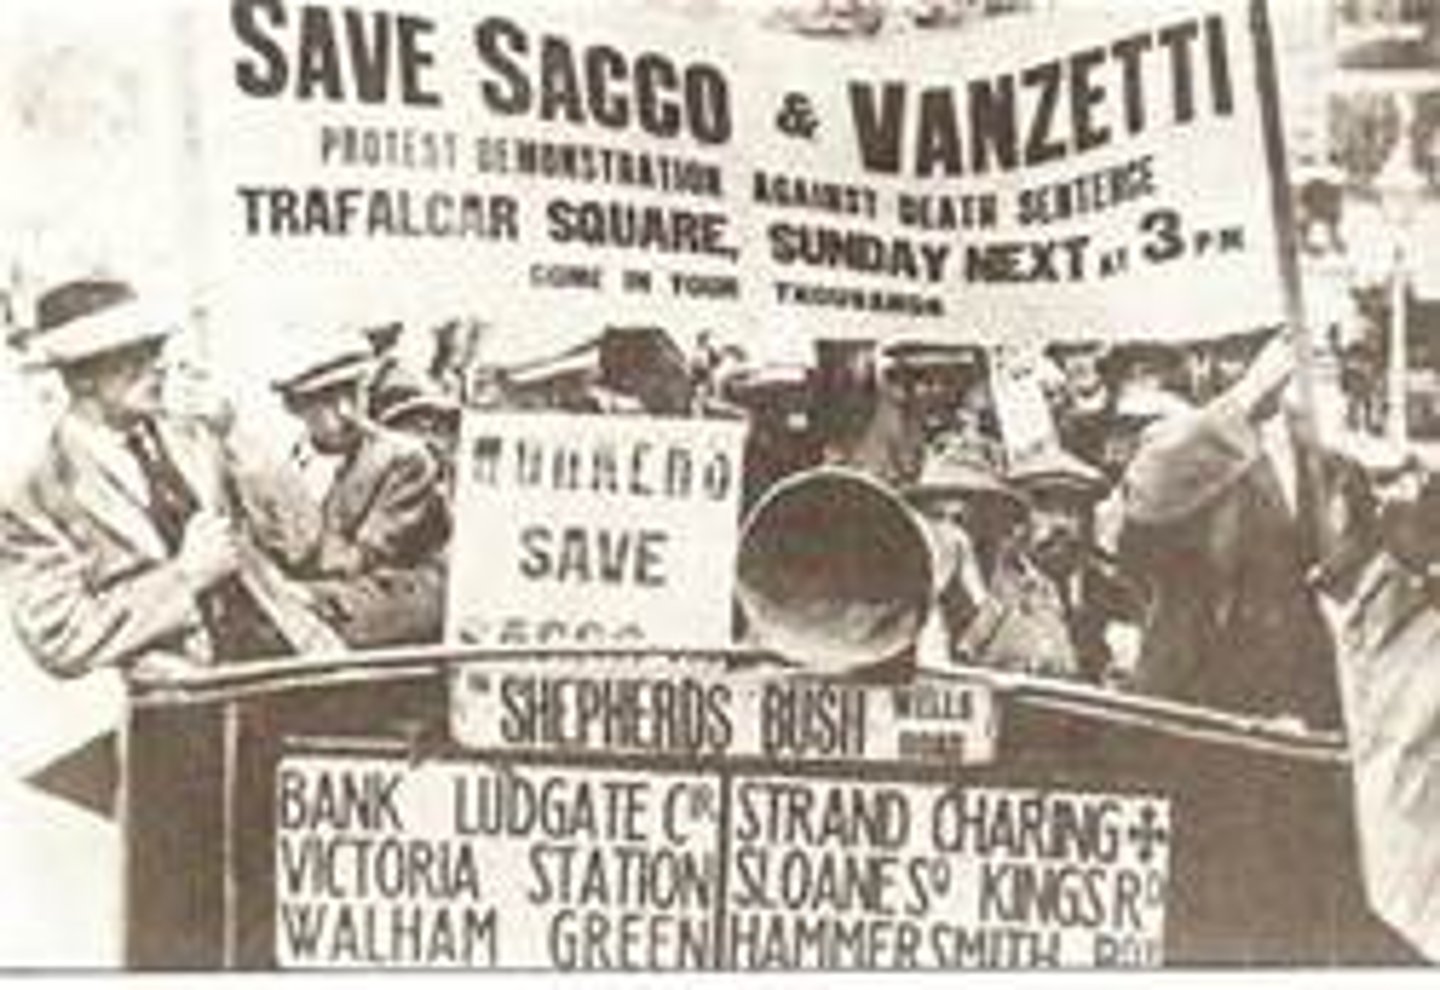 <p>Nicola Sacco and Bartolomeo Vanzetti were Italian immigrants charged with murdering a guard and robbing a shoe factory in Braintree, Massachusetts. The trial lasted from 1920-1927. Convicted on circumstantial evidence; many believed they had been framed for the crime because of their anarchist and pro-union activities.</p>